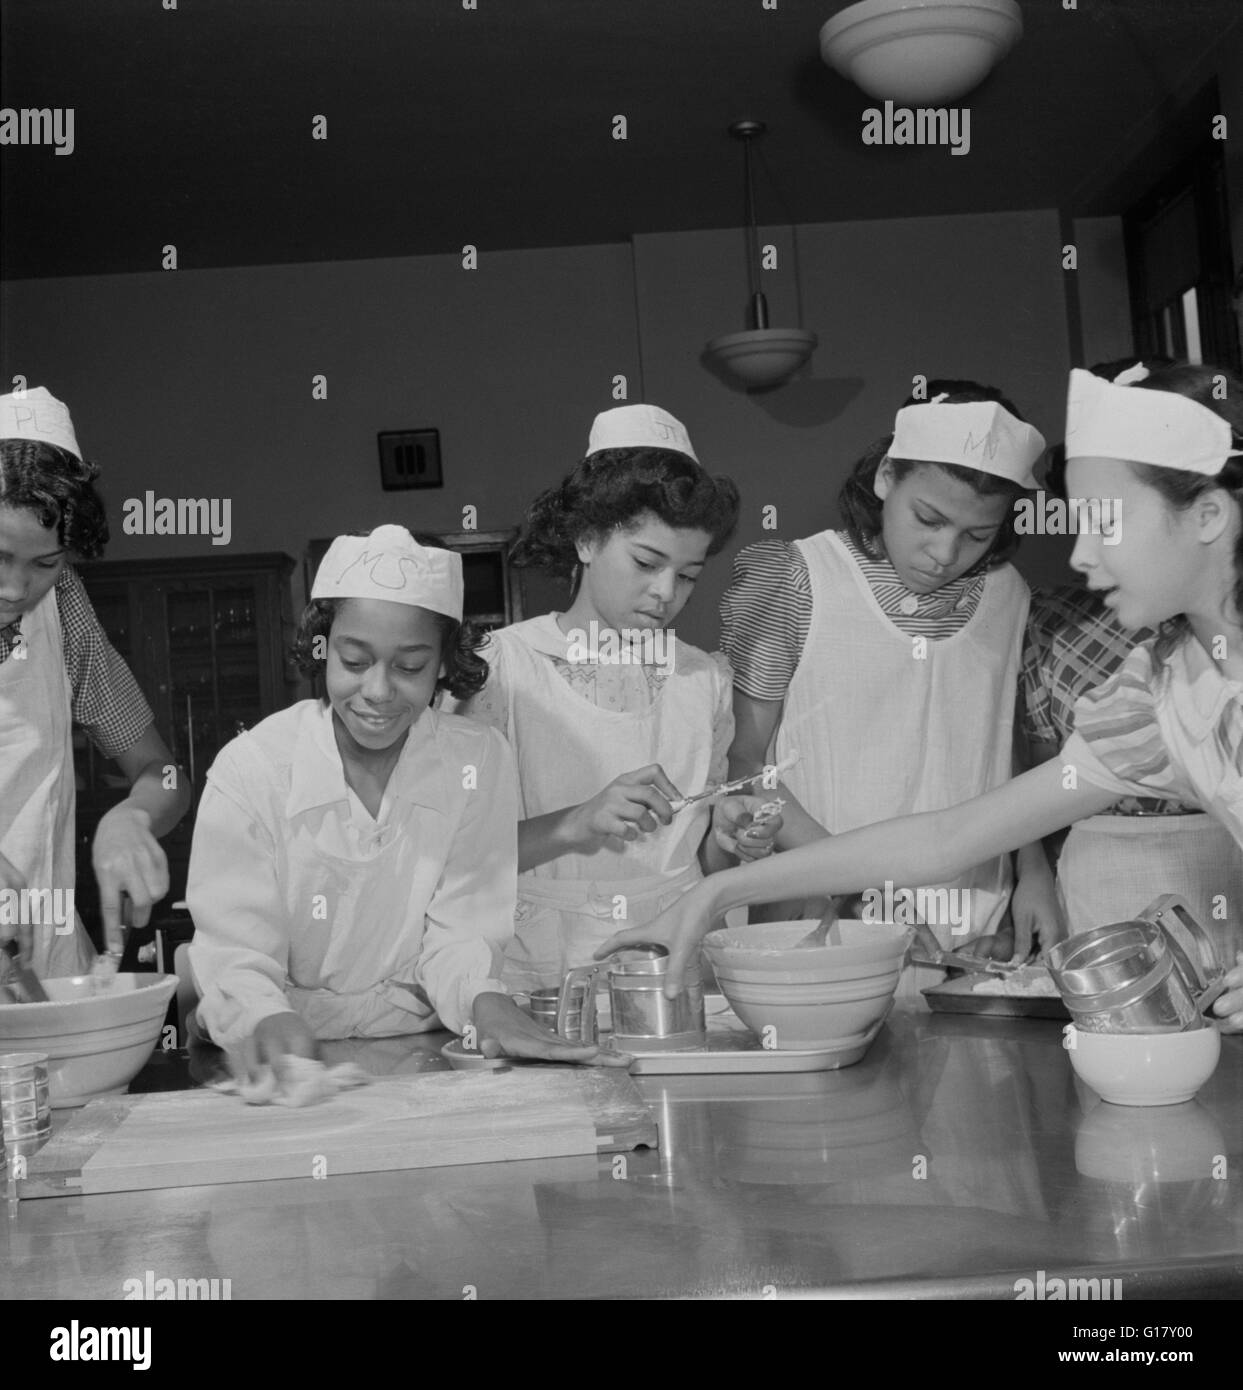 Students in Cooking Class, Banneker Junior High School, Washington DC, USA, Marjorie Collins for Farm Security Administration, March 1942 Stock Photo